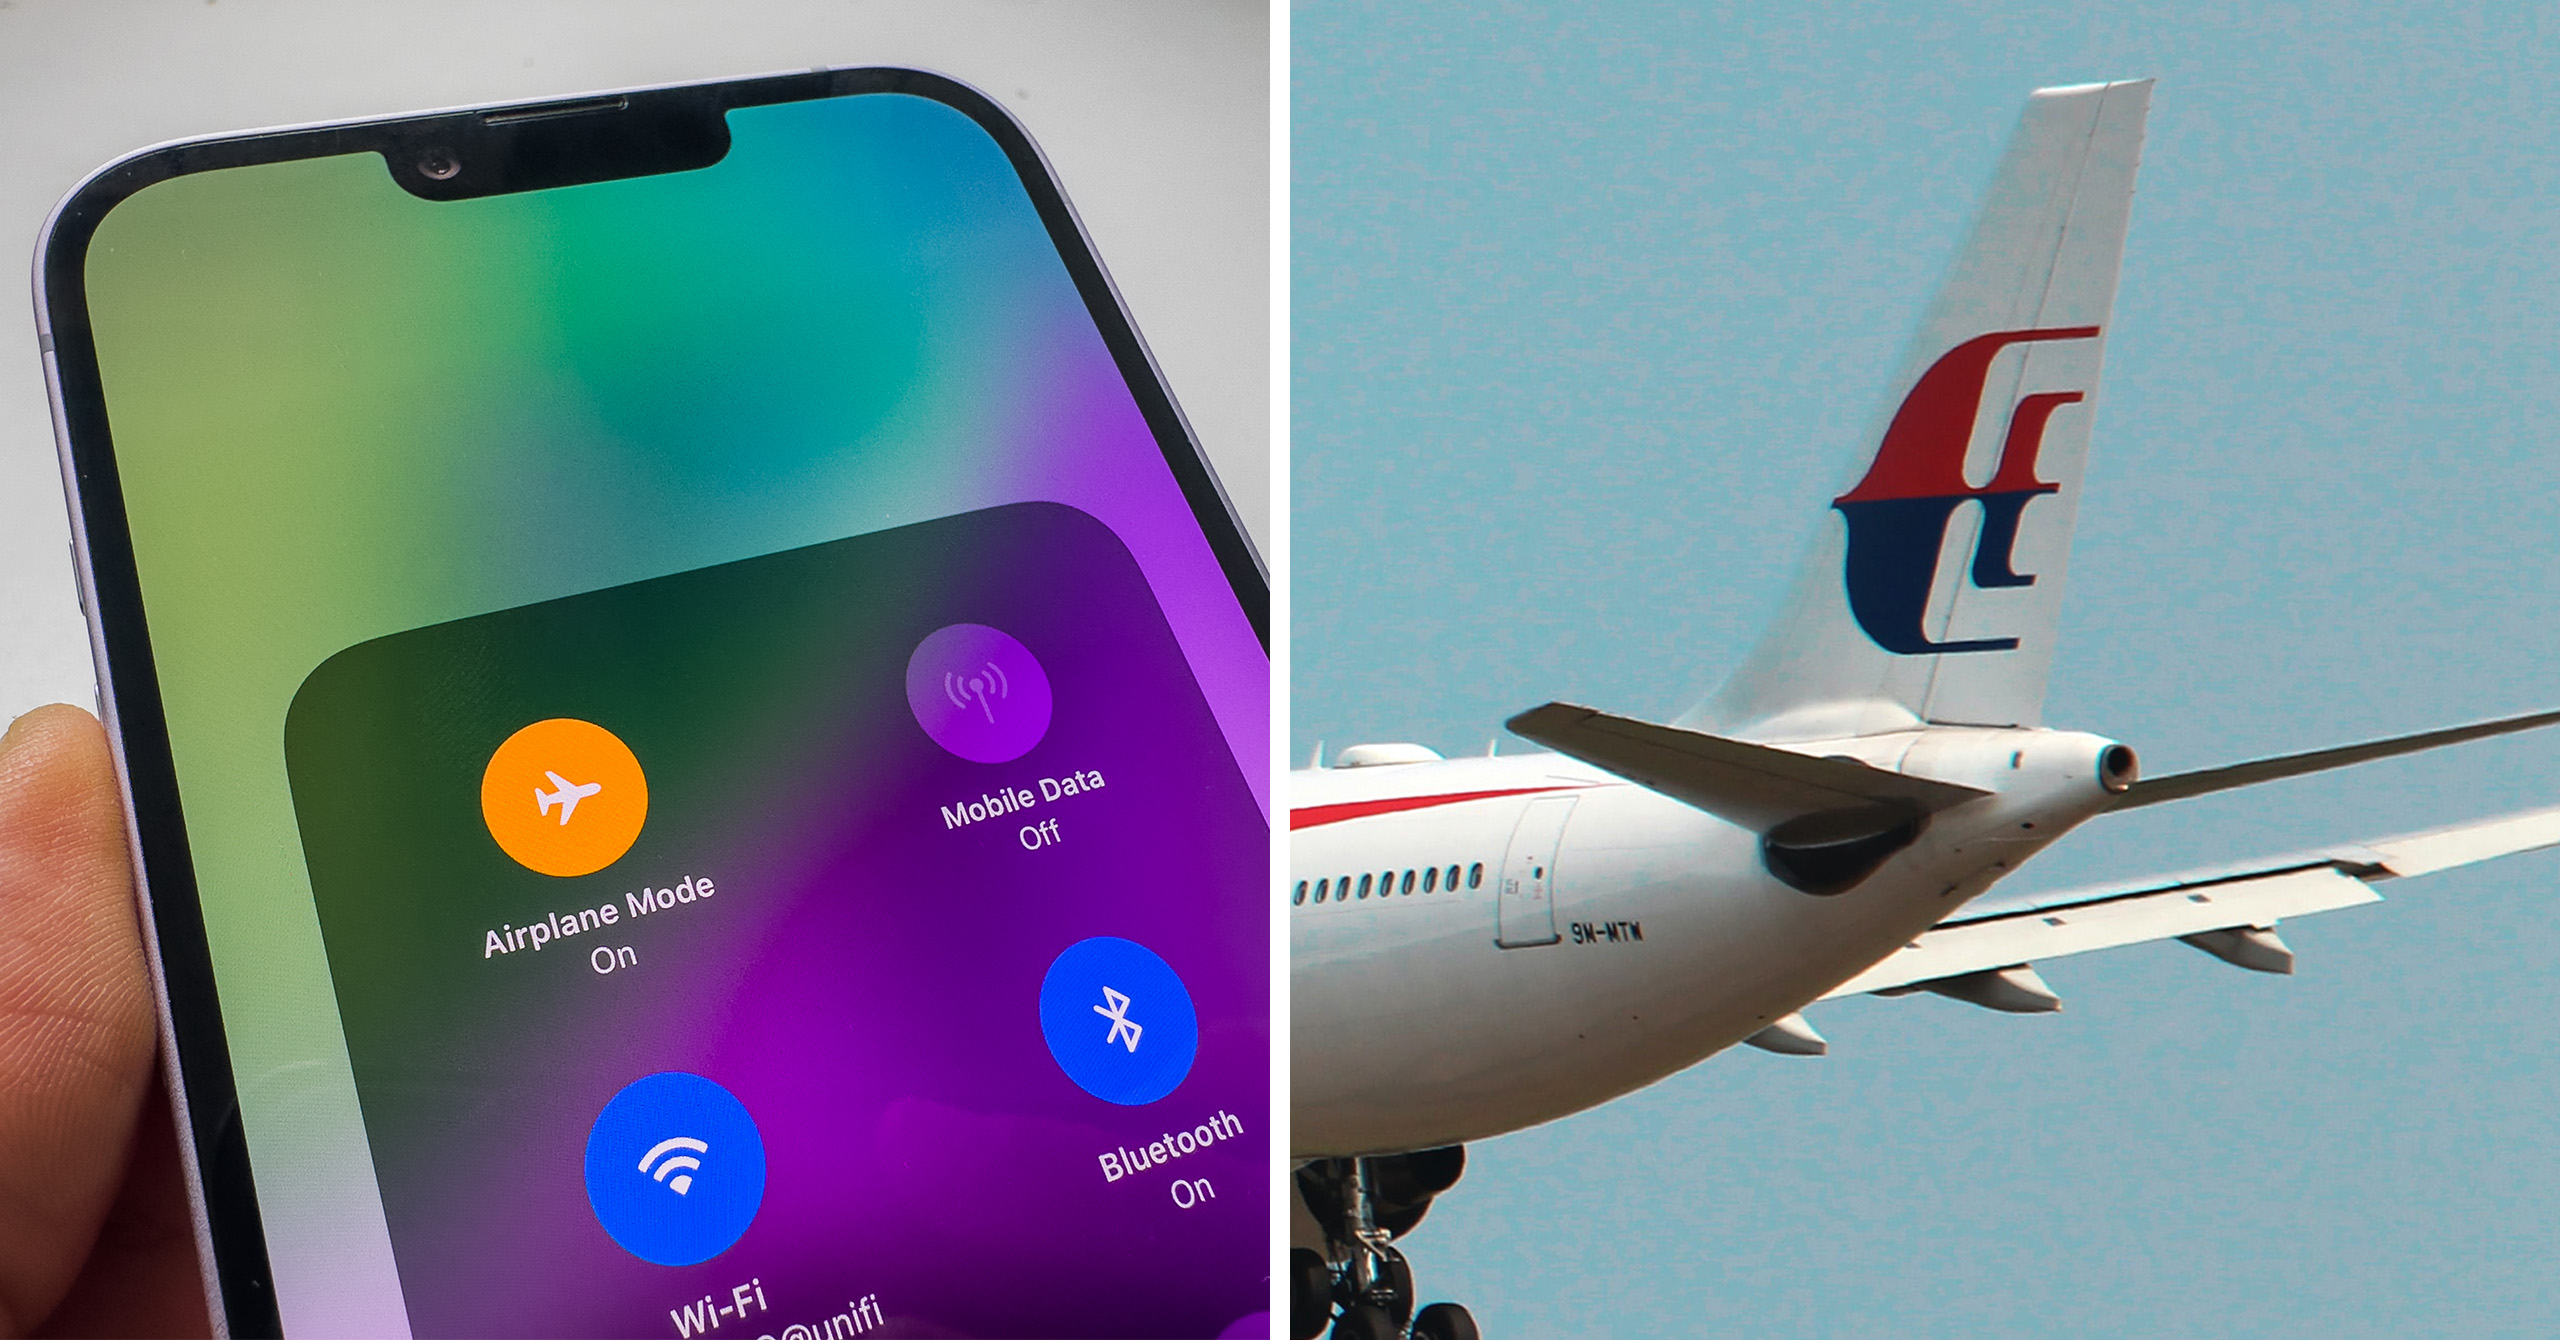 Say goodbye to Airplane Mode in the EU: Airlines set to introduce